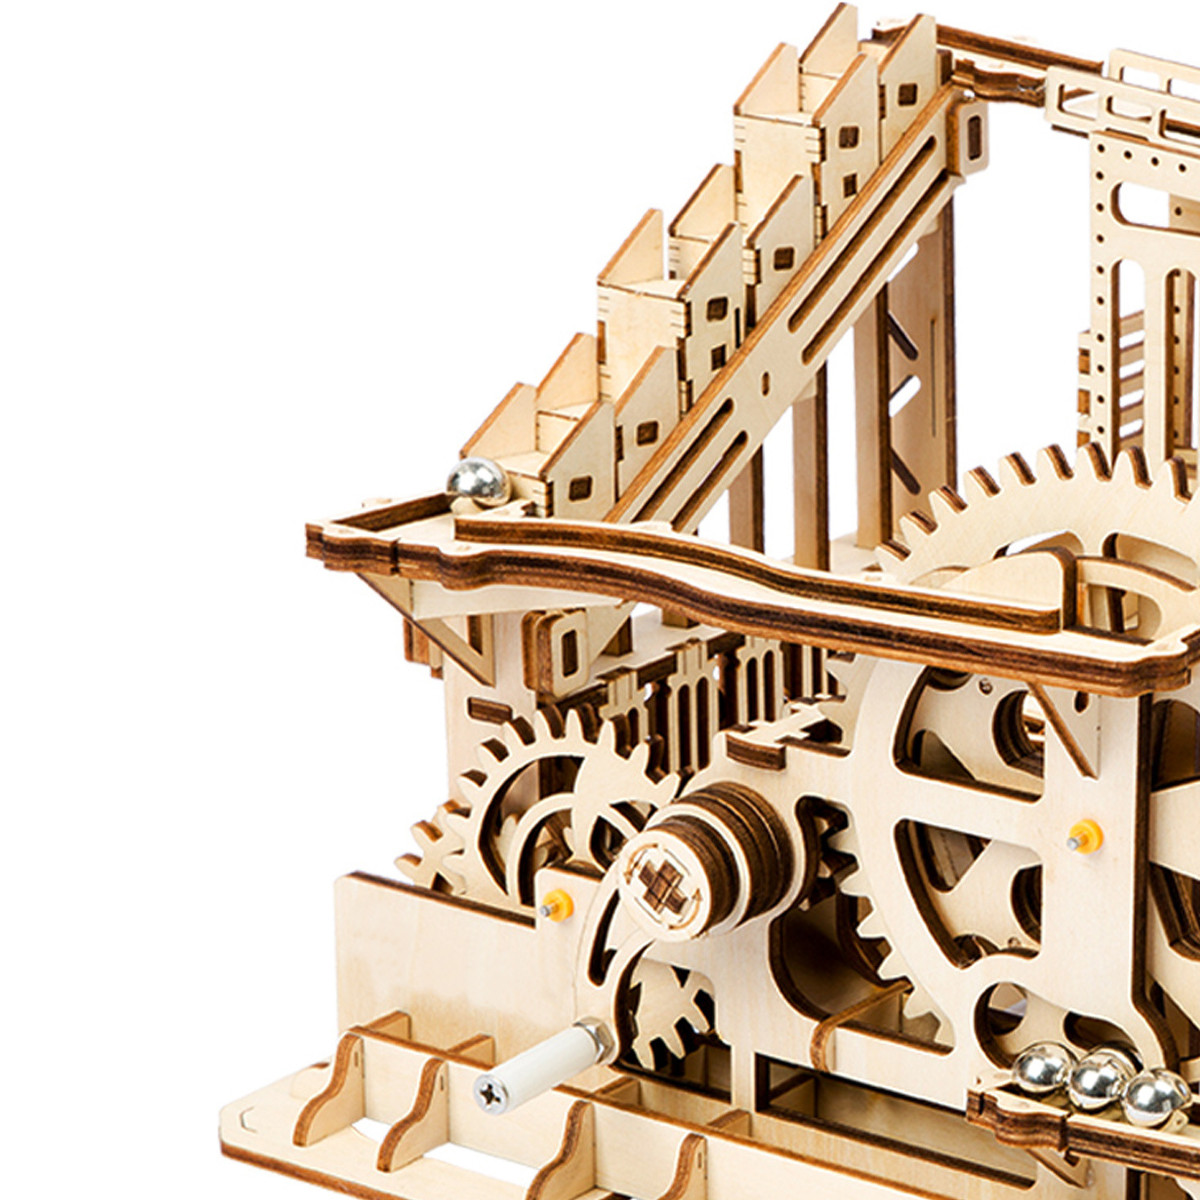 Robotime-4-Kinds-Hand-Crank-Marble-Run-Game-DIY-Coaster-Wooden-Model-Building-Kits-Assembly-Toy-Gift-1698293-7